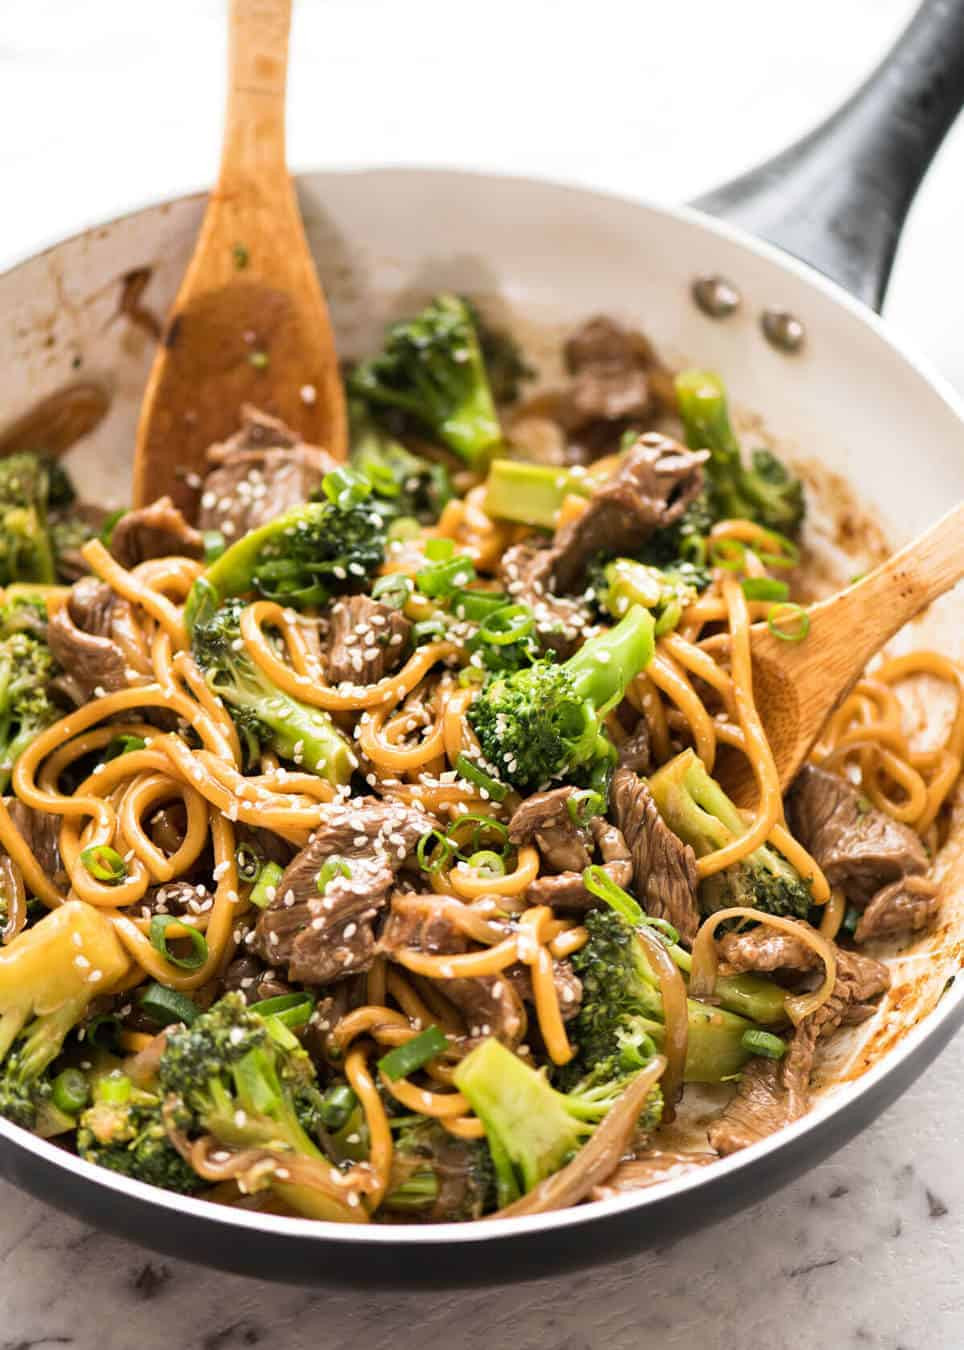 Recipe For Beef And Noodles
 Chinese Beef and Broccoli Noodles